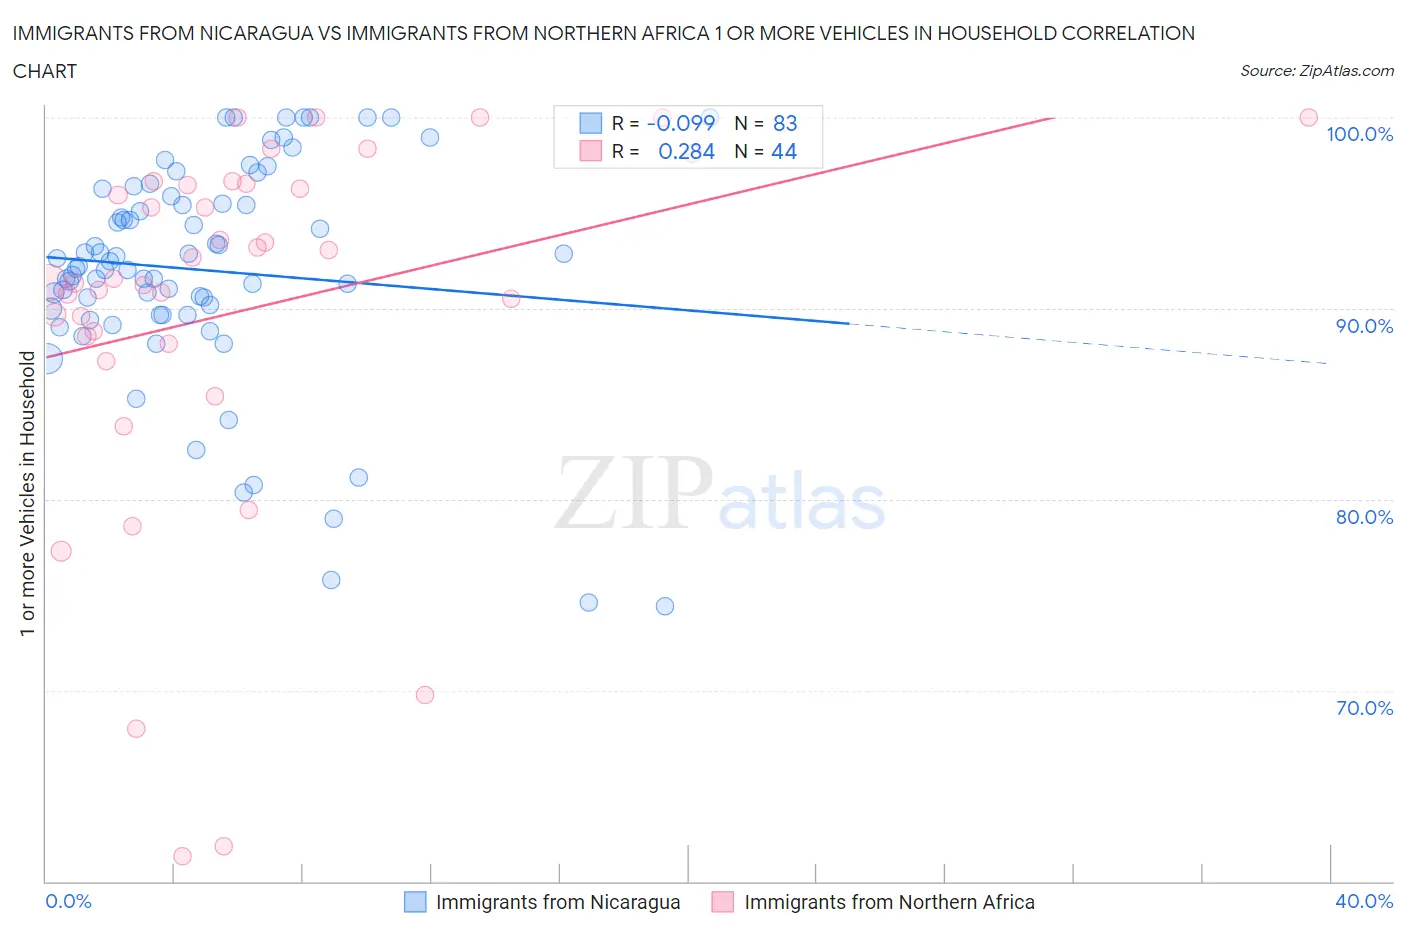 Immigrants from Nicaragua vs Immigrants from Northern Africa 1 or more Vehicles in Household